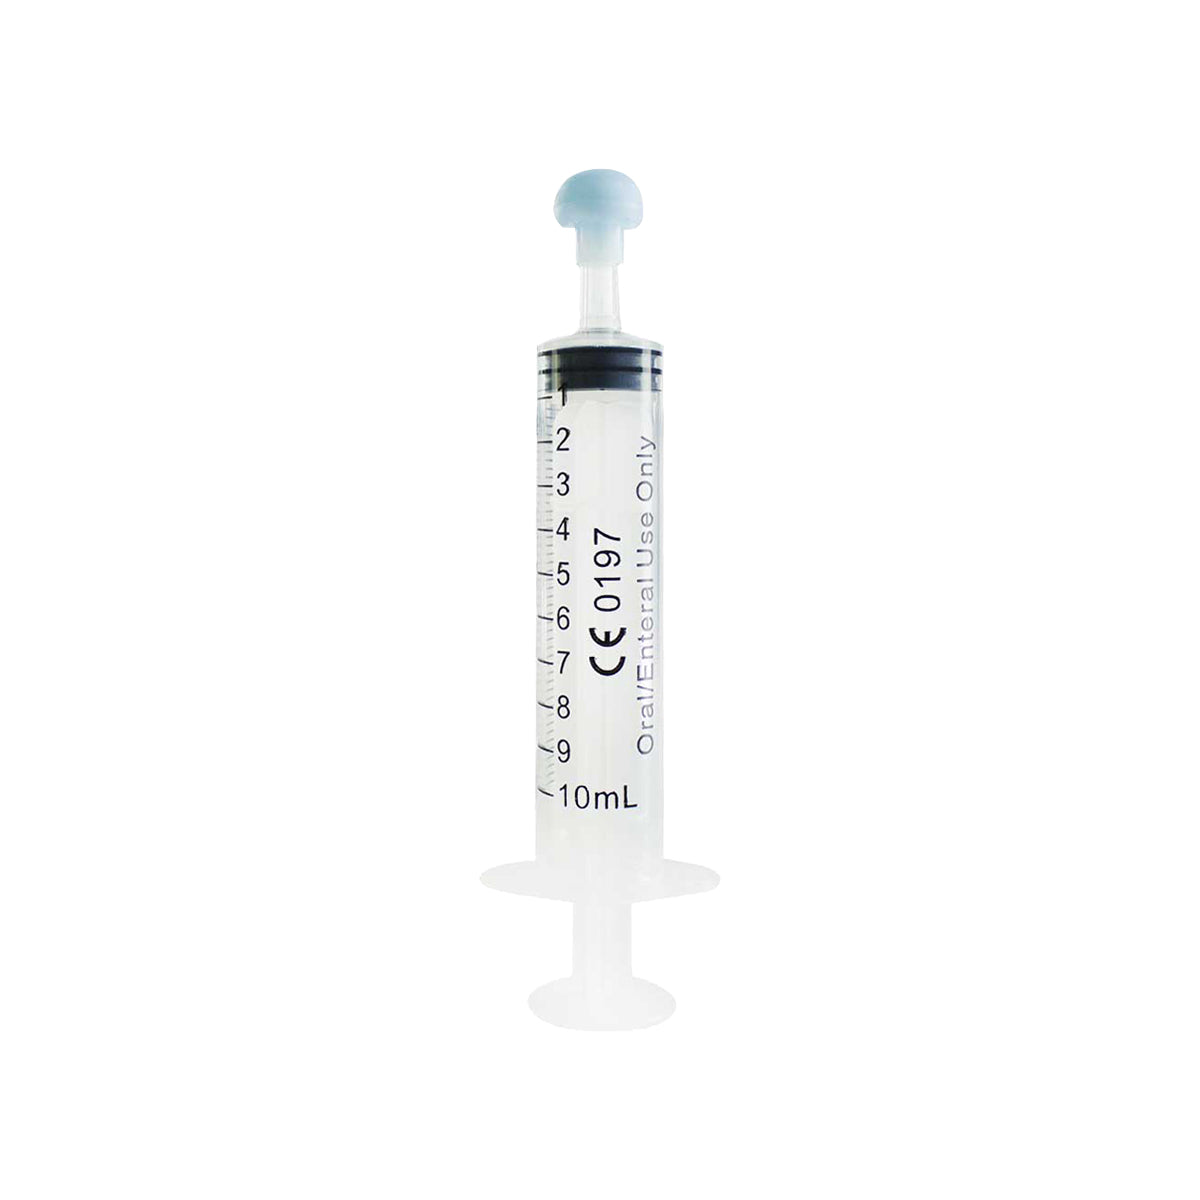 Concentrate Syringe | Oral Concentrate Syringes | 10mL - 1mL Increments - 100 Count Syringe Biohazard Inc   